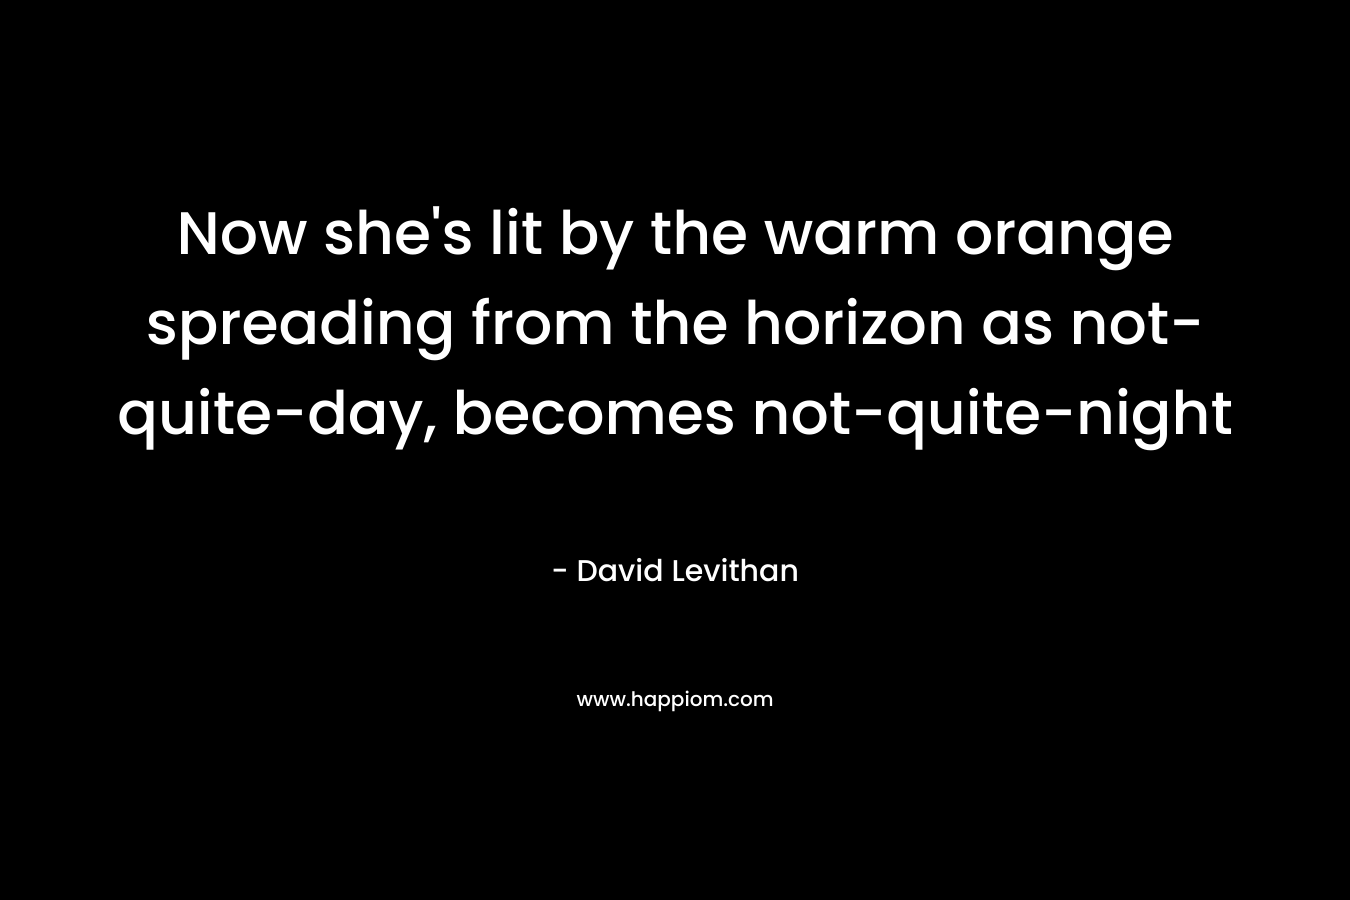 Now she’s lit by the warm orange spreading from the horizon as not-quite-day, becomes not-quite-night – David Levithan